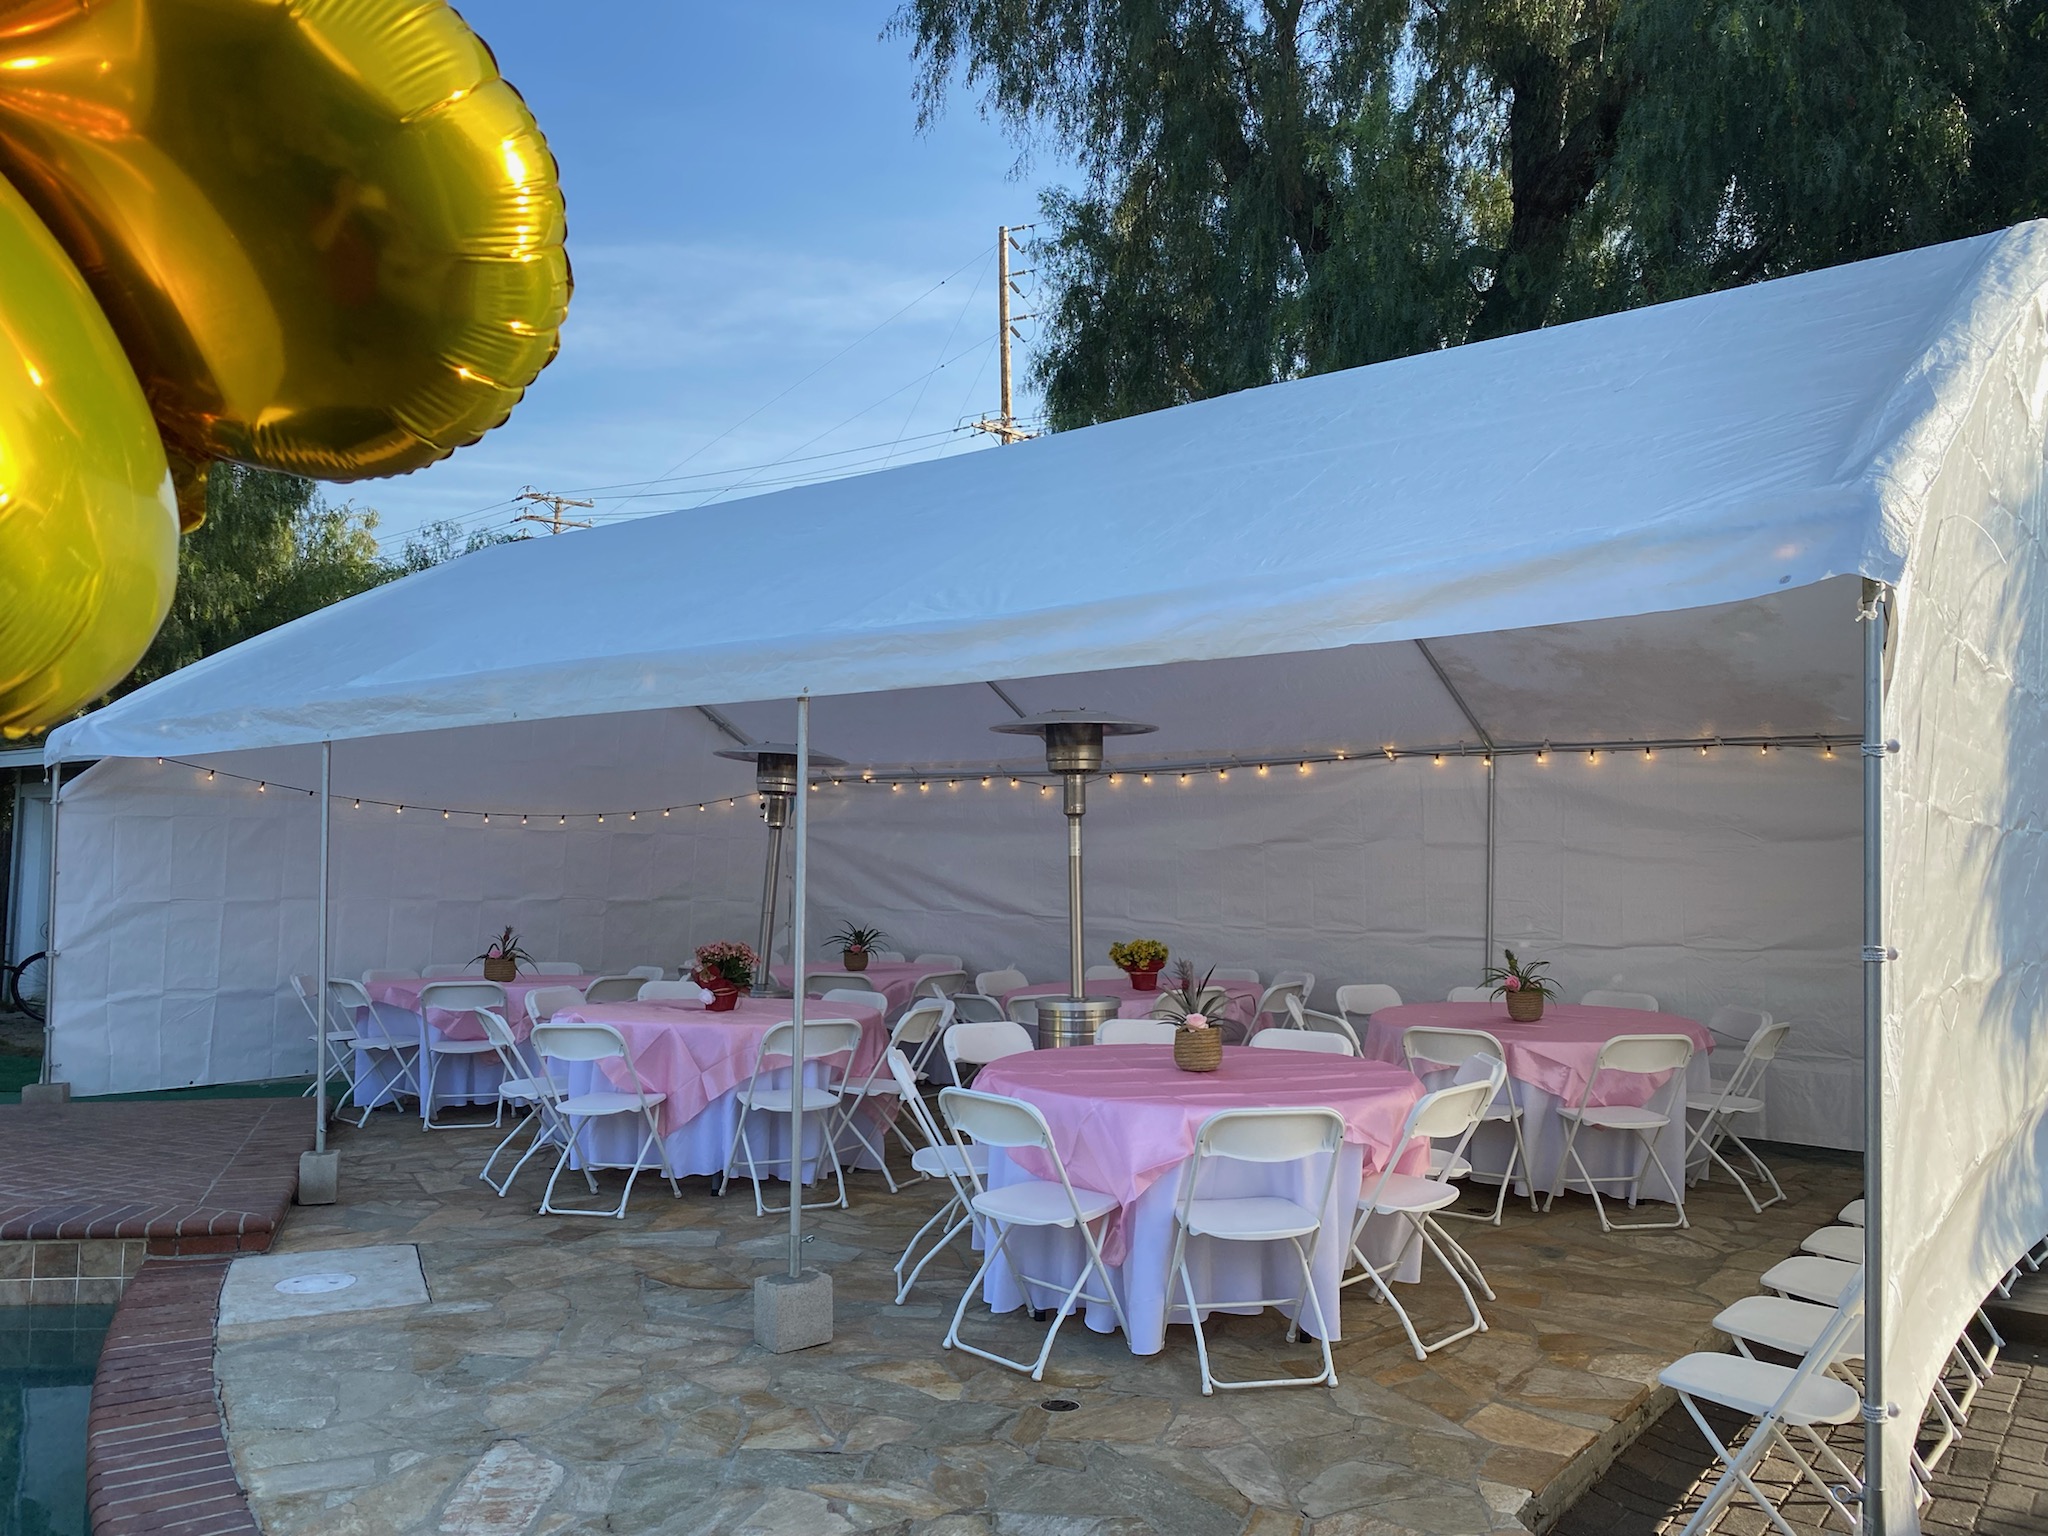 30 x 30 Frame Tent Package 12 Banquet Tables & 100 Black Chairs Included